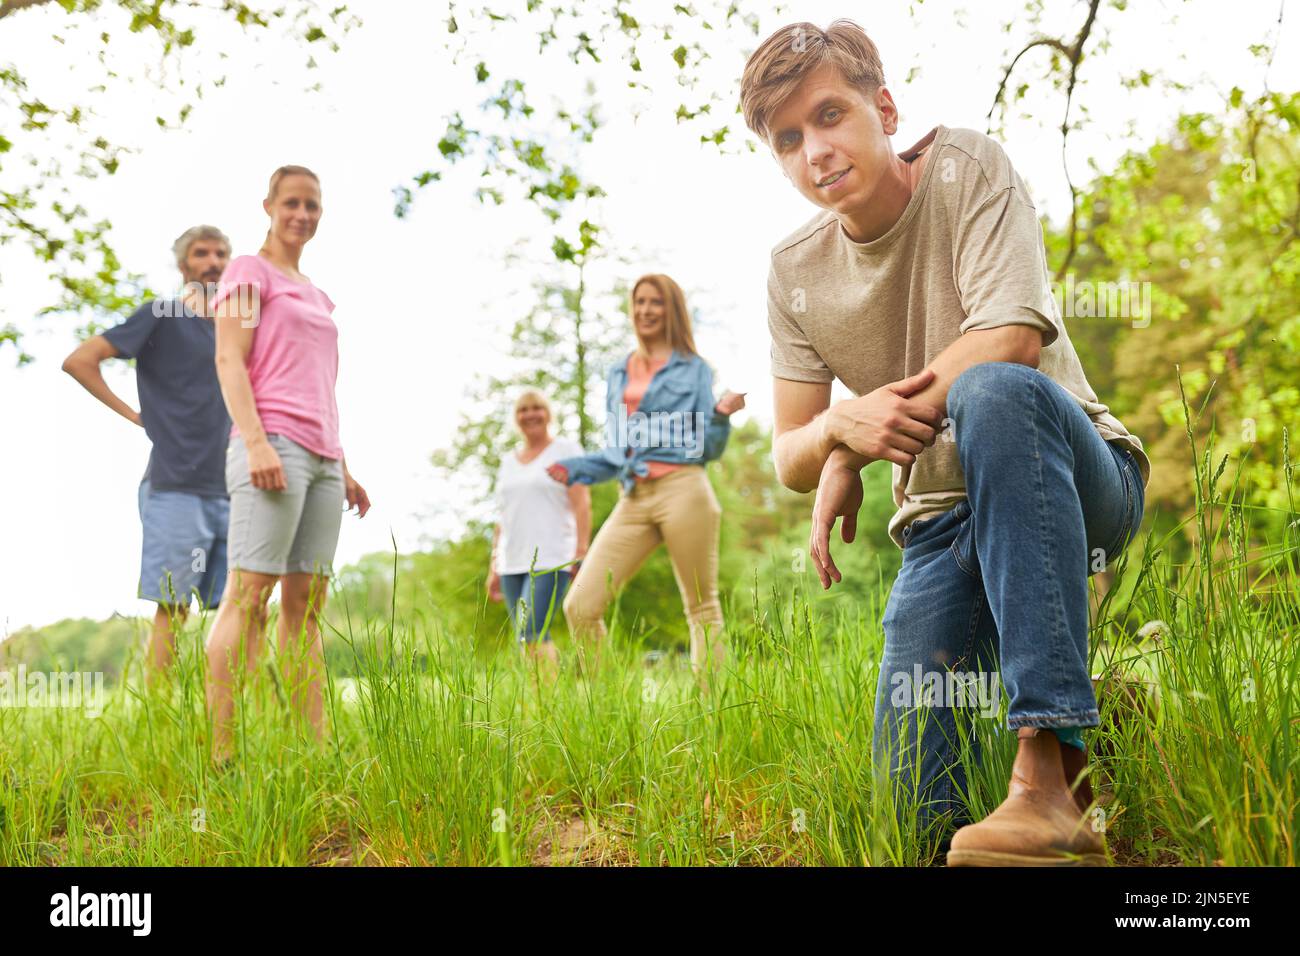 Young man and friends on a trip or hike in nature in summer Stock Photo